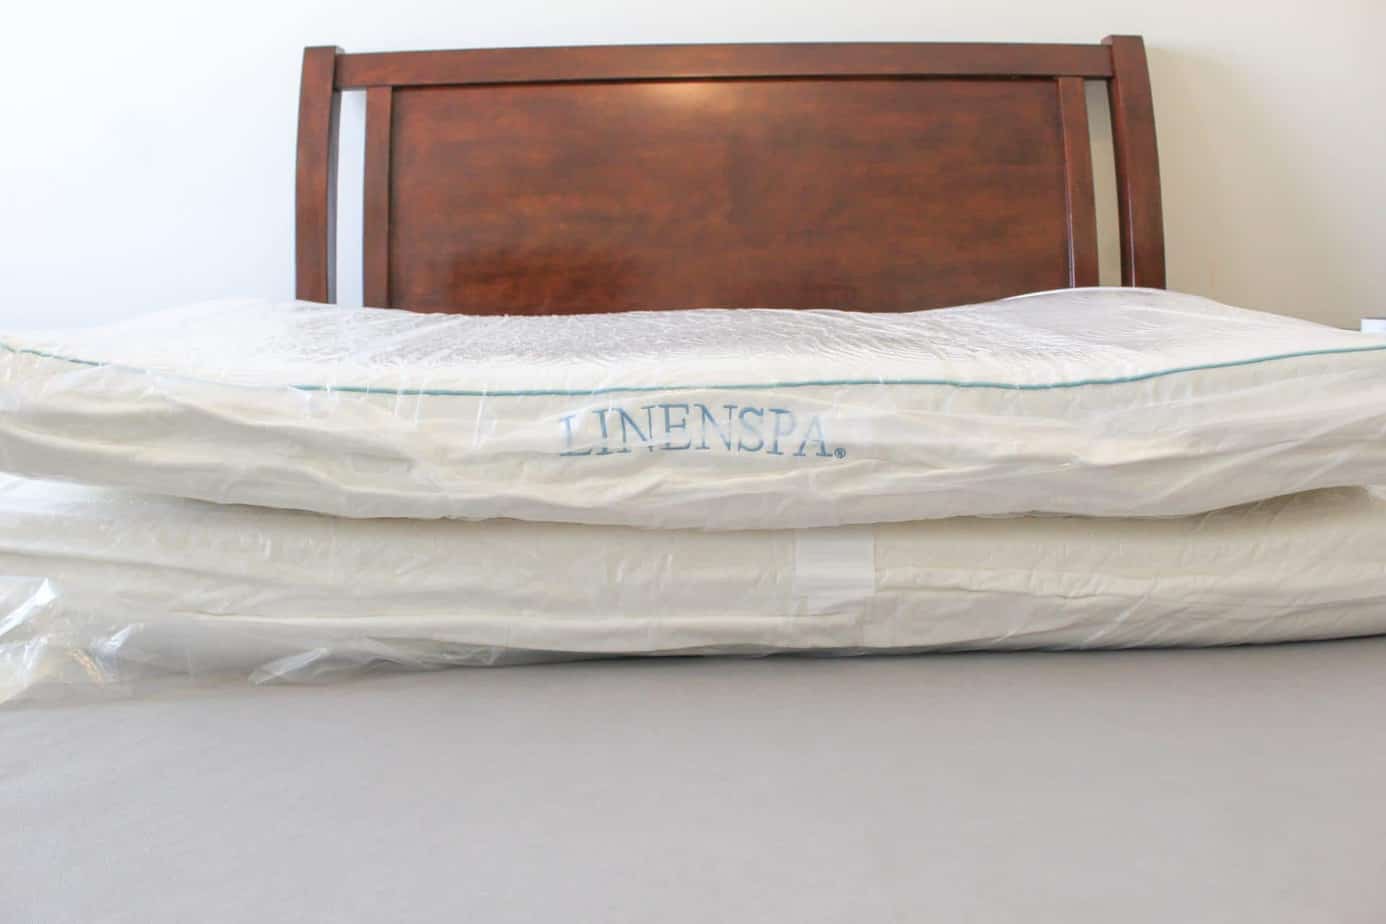 Have you tried the Linenspa foam mattress before? This review will answer many of your questions and give you an idea of what you can expect when you order the Linenspa 10" memory foam mattress. It's delivered right to your door and easy to set up. You'll love your new mattress and get a good nights rest.